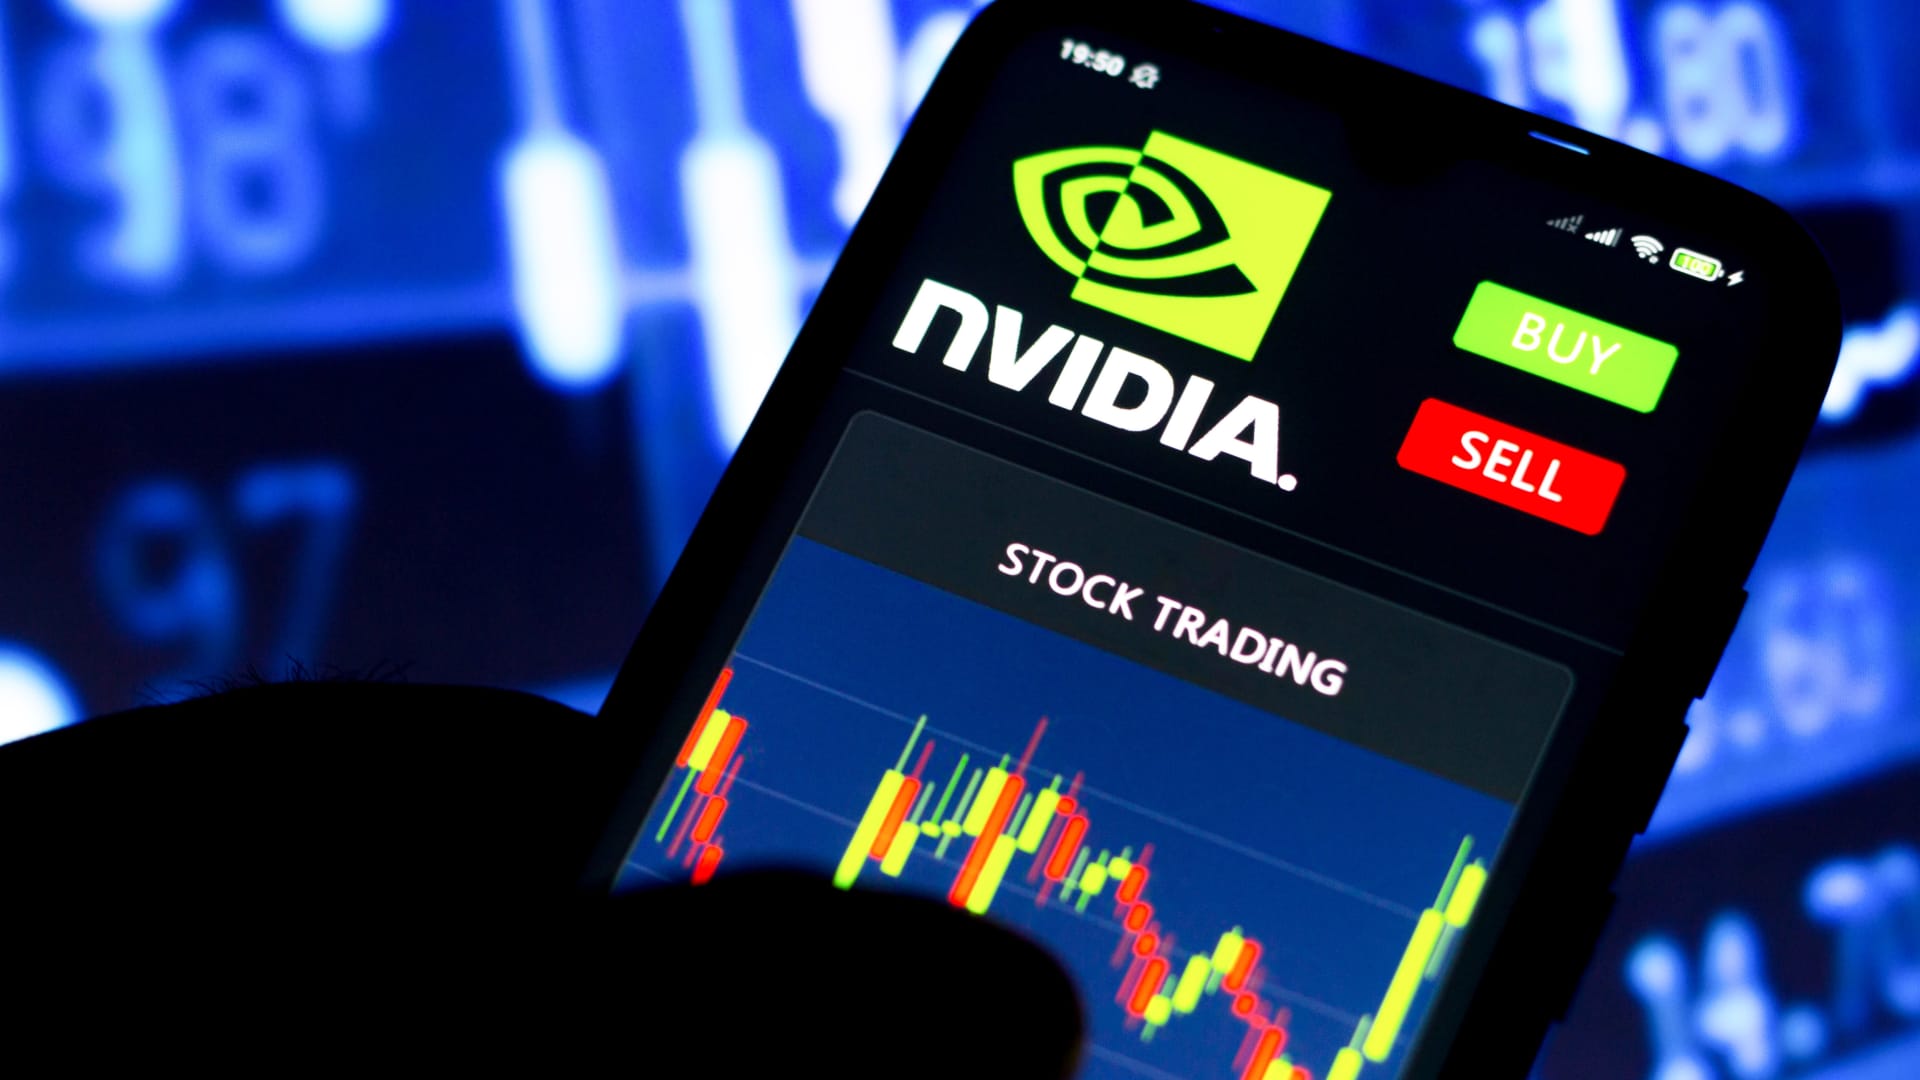 Nvidia rally fueling FOMO in overall market: Evercore’s Julian Emanuel